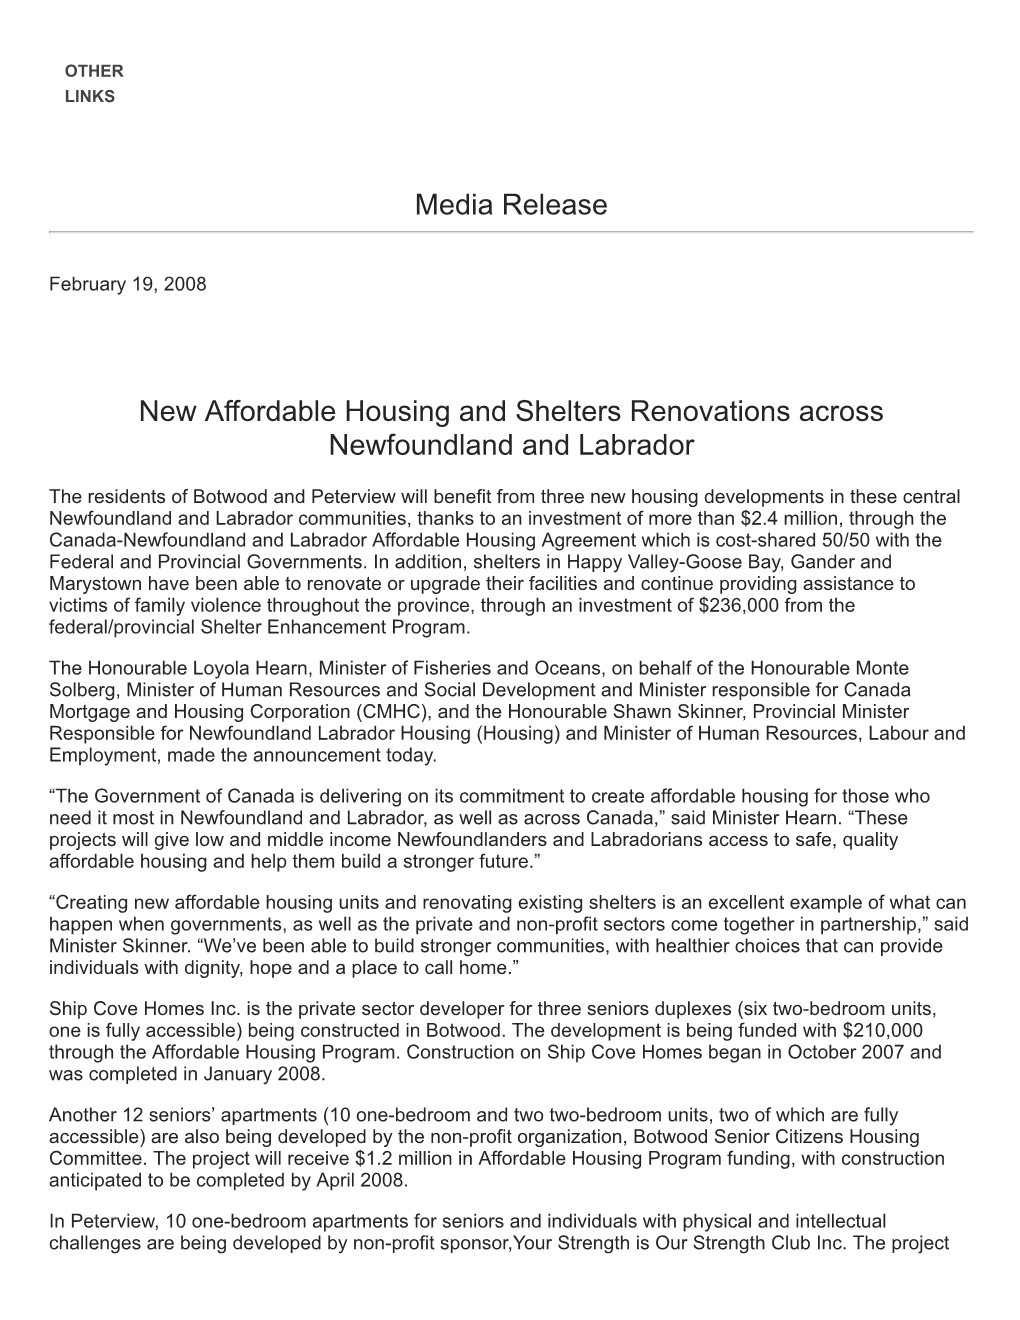 Media Release New Affordable Housing and Shelters Renovations Across Newfoundland and Labrador